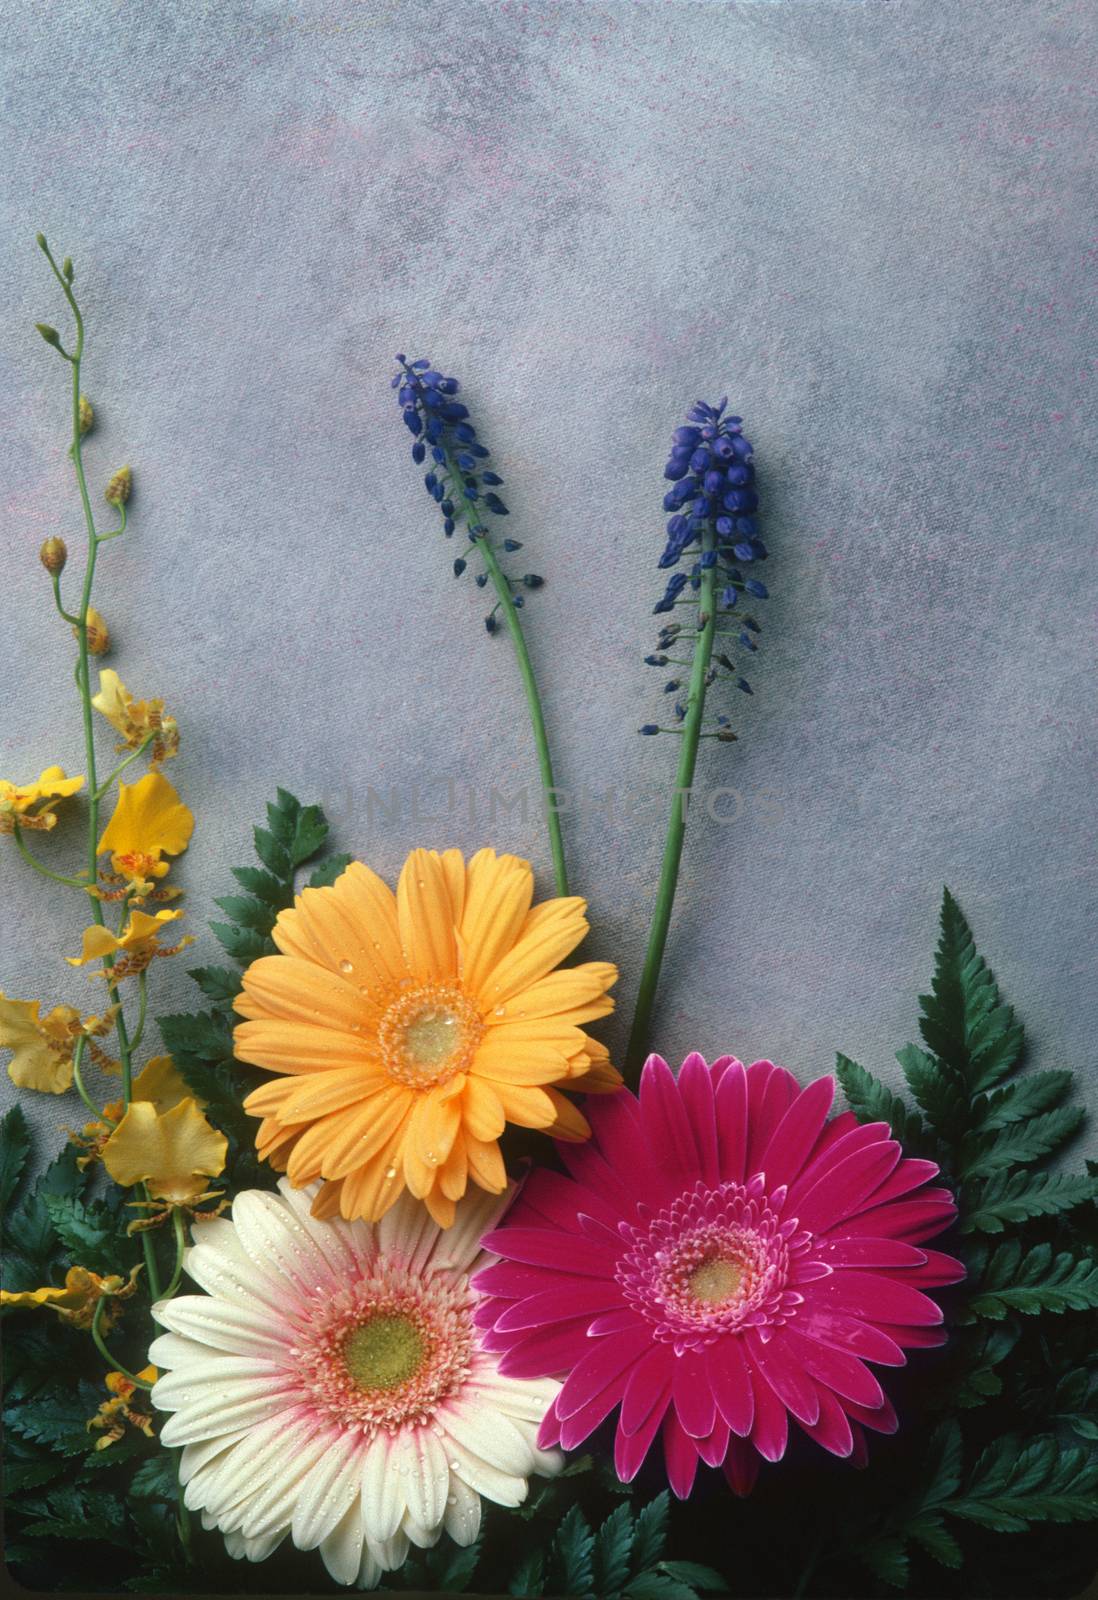 Flowers including Gerber Daisies, laid against a painted canvas backdrop